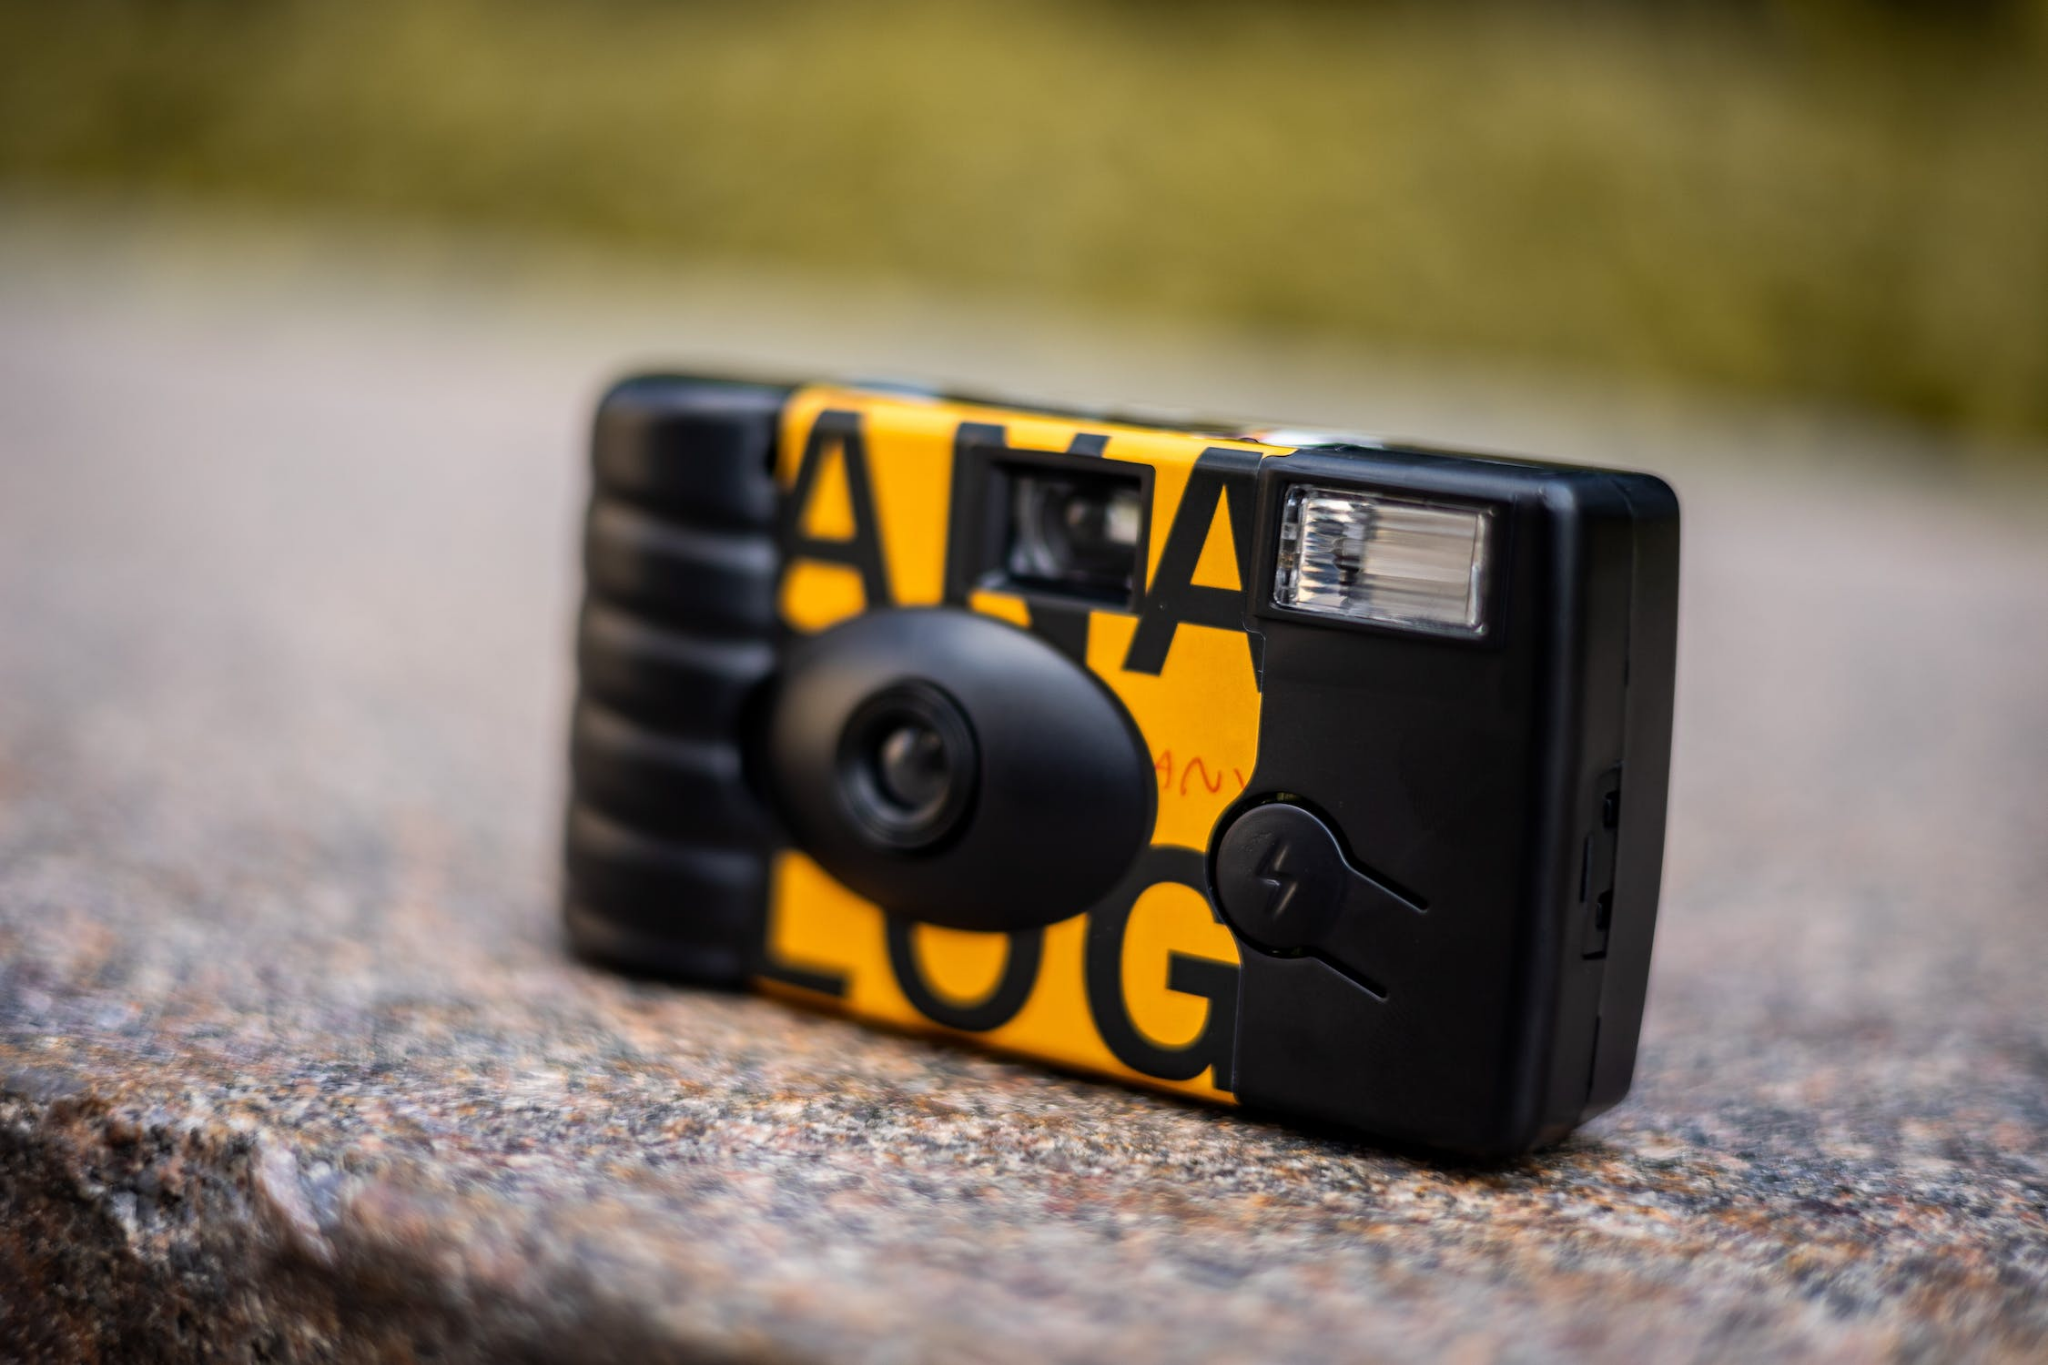 This Film Camera Shoots like a Disposable but Doesn't Hurt the Earth